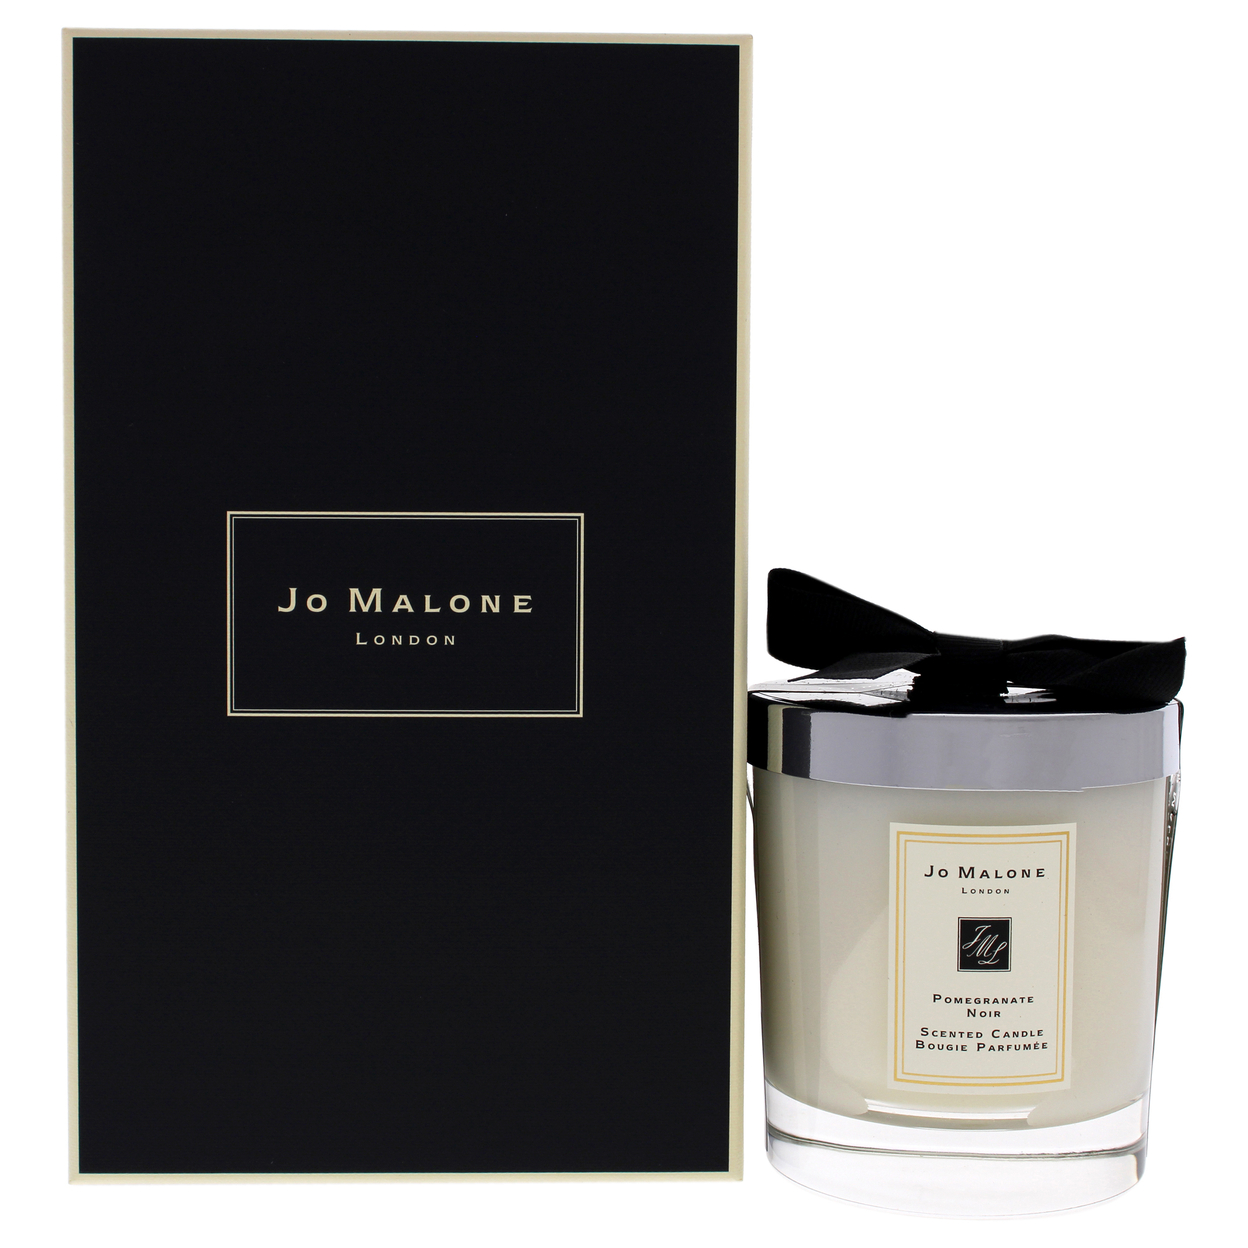 Jo Malone Unisex CANDLES Pomegranate Noir Scented Candle 7 Oz